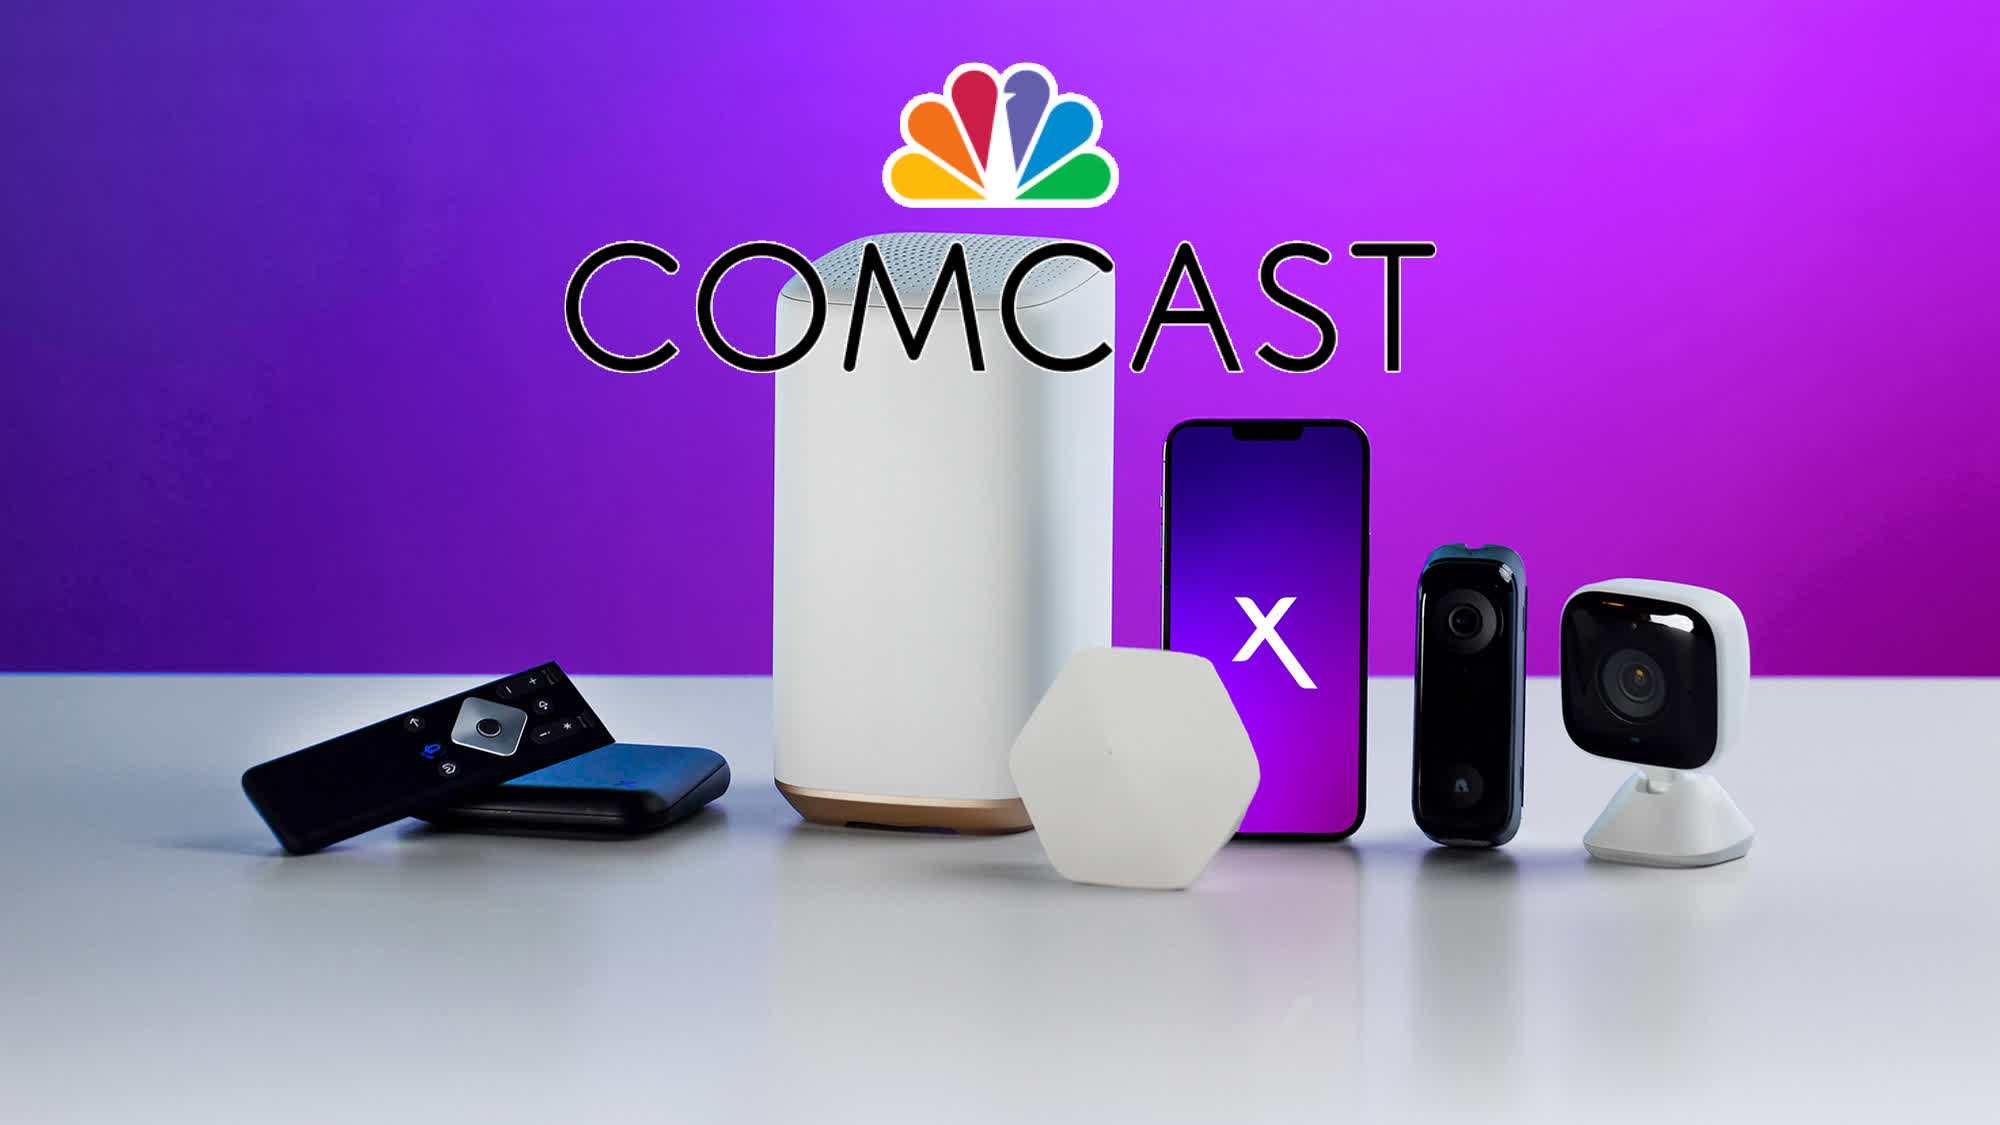 Comcast tells the FCC that it doesn't want to reveal its hidden broadband fees upfront